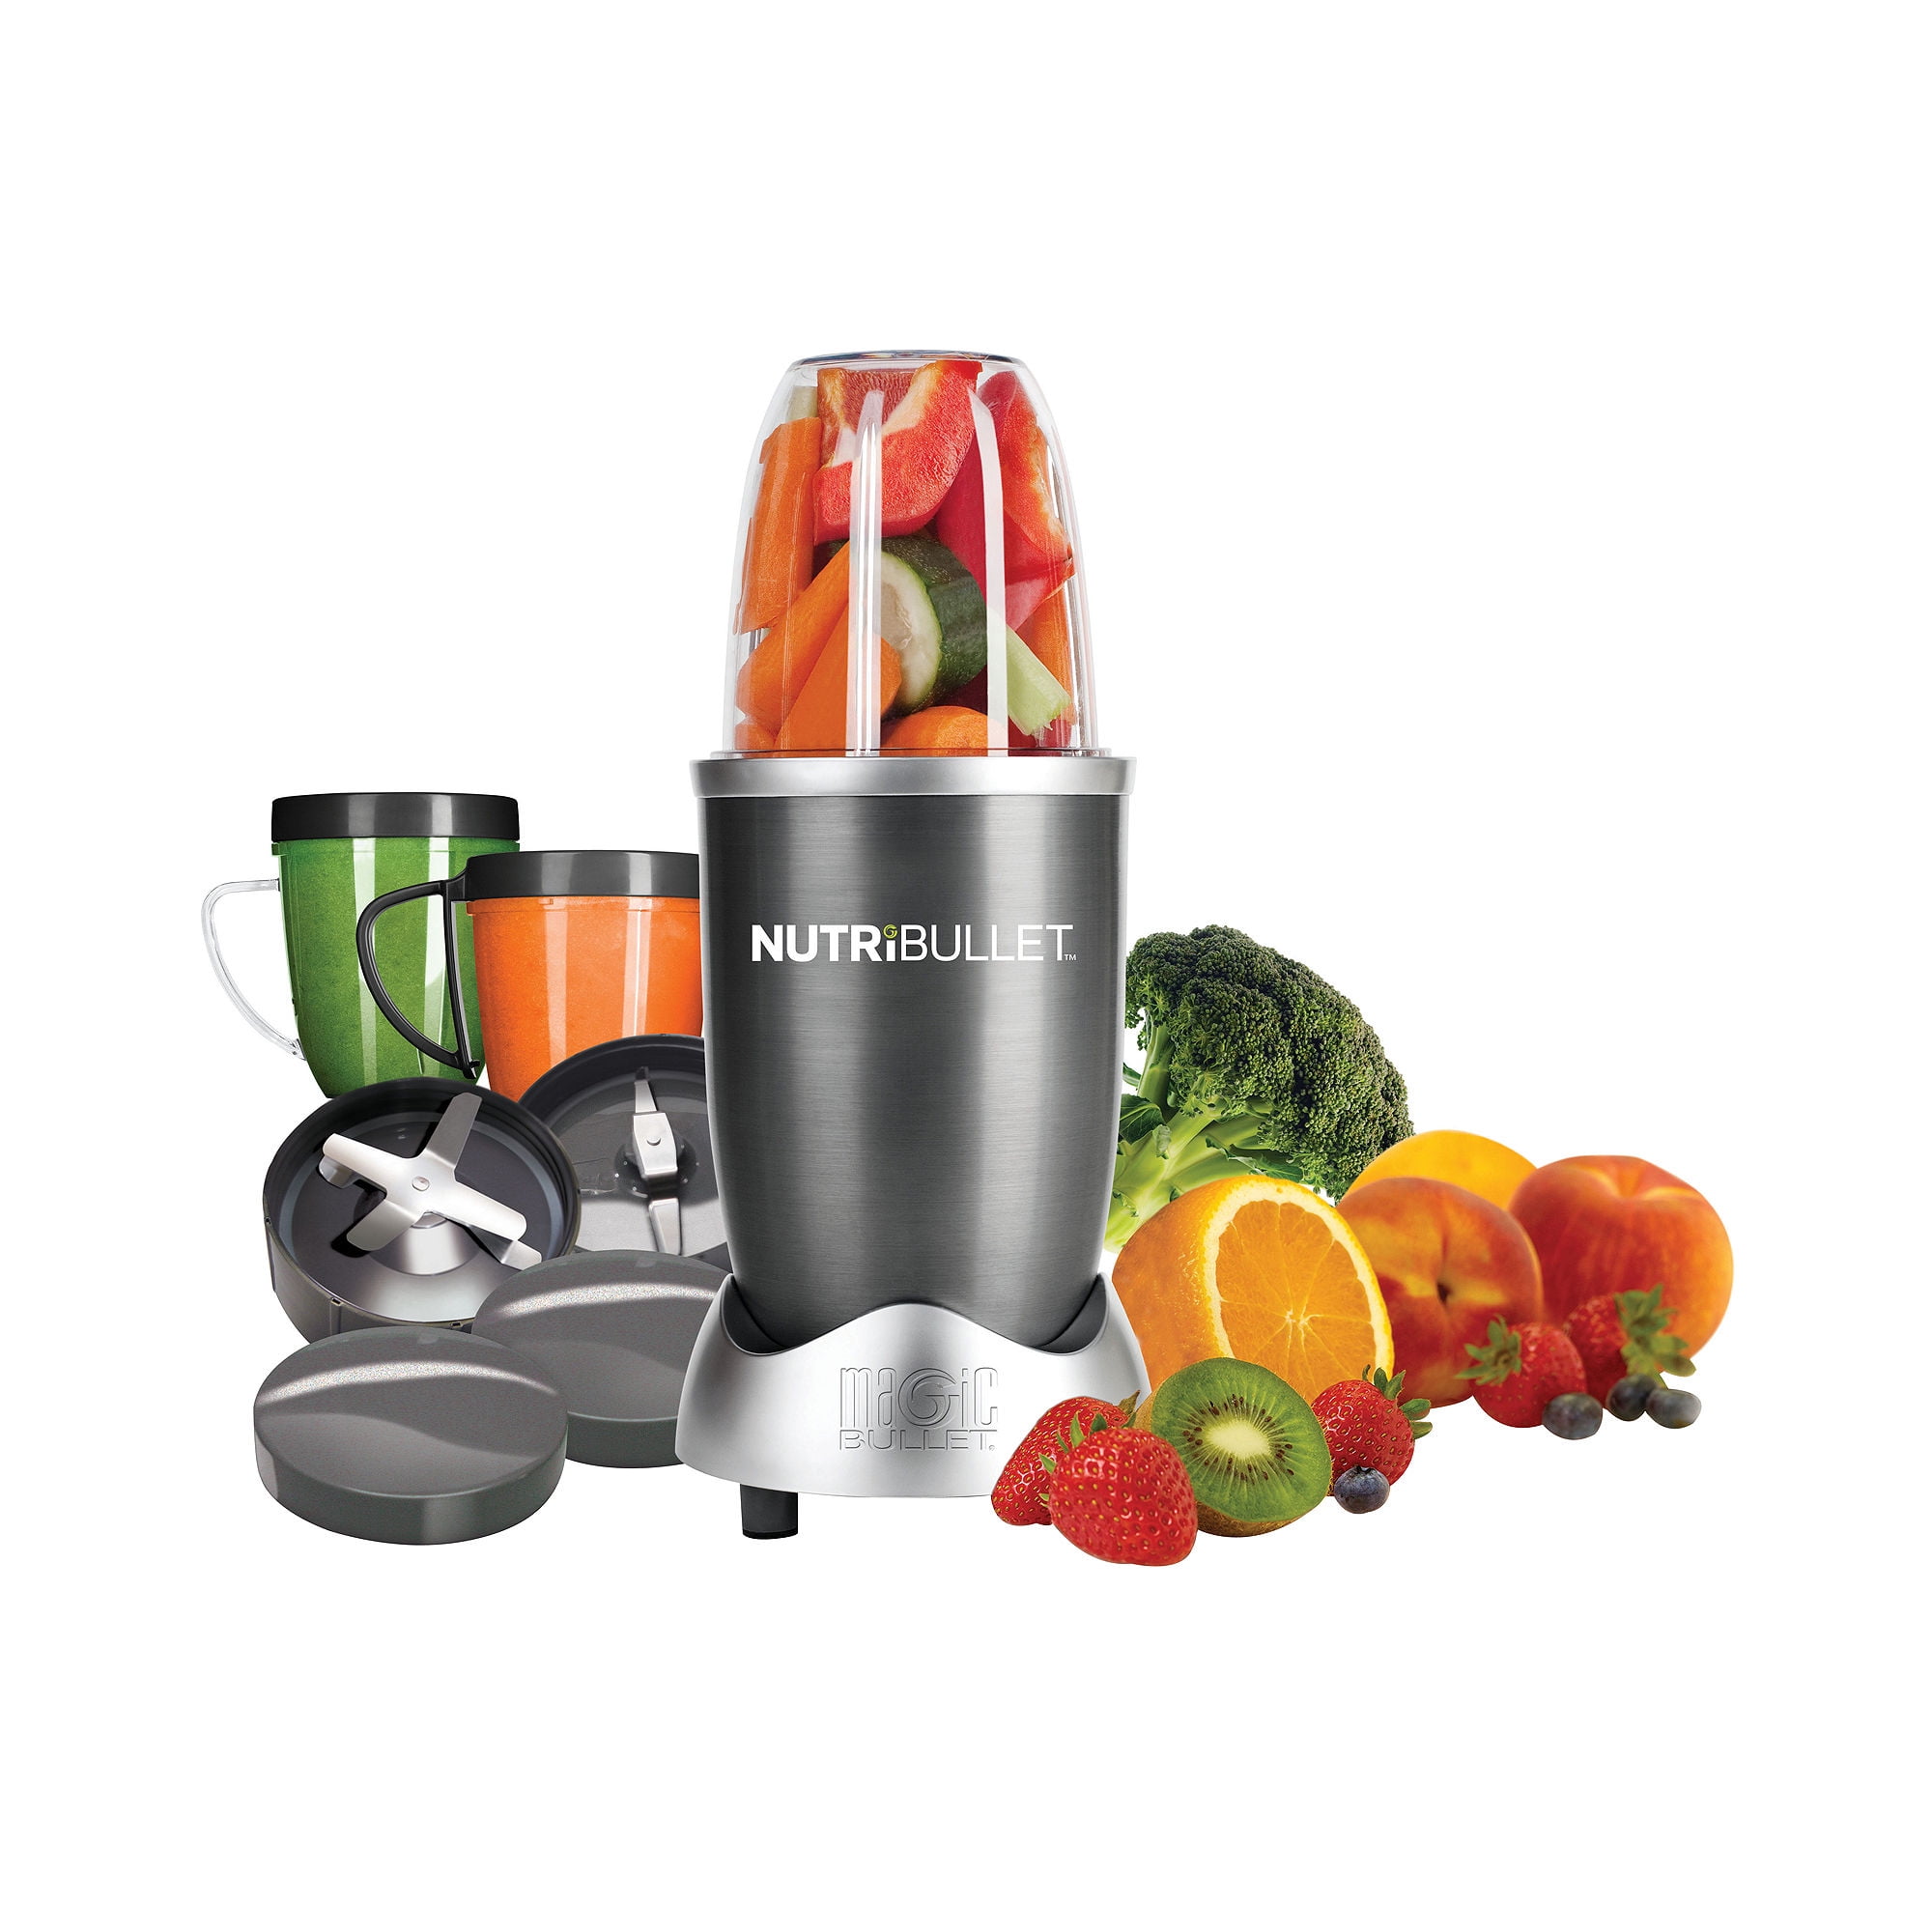 BEST VALUE NutriBullet RX by Magic Bullet LARGEST 12 pc set New in